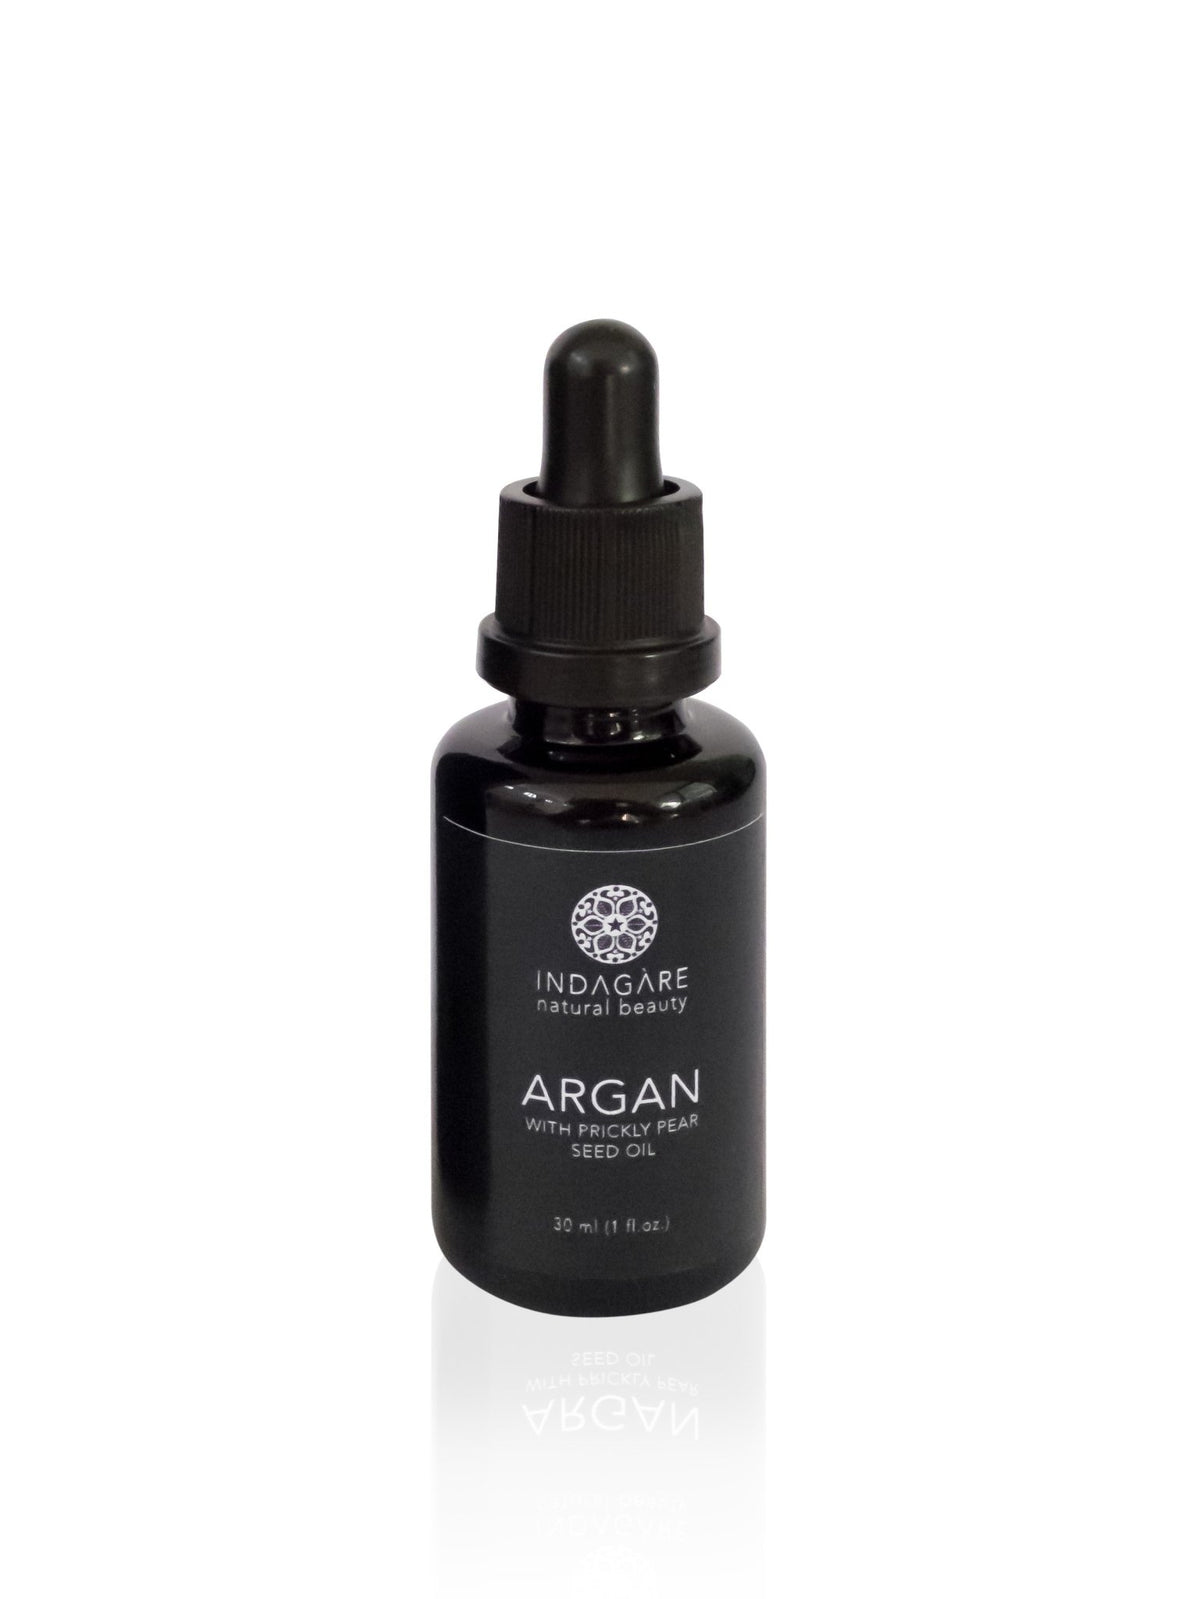 Organic Argan &amp; Prickly Pear Seed Oil - Indagare Natural Beauty